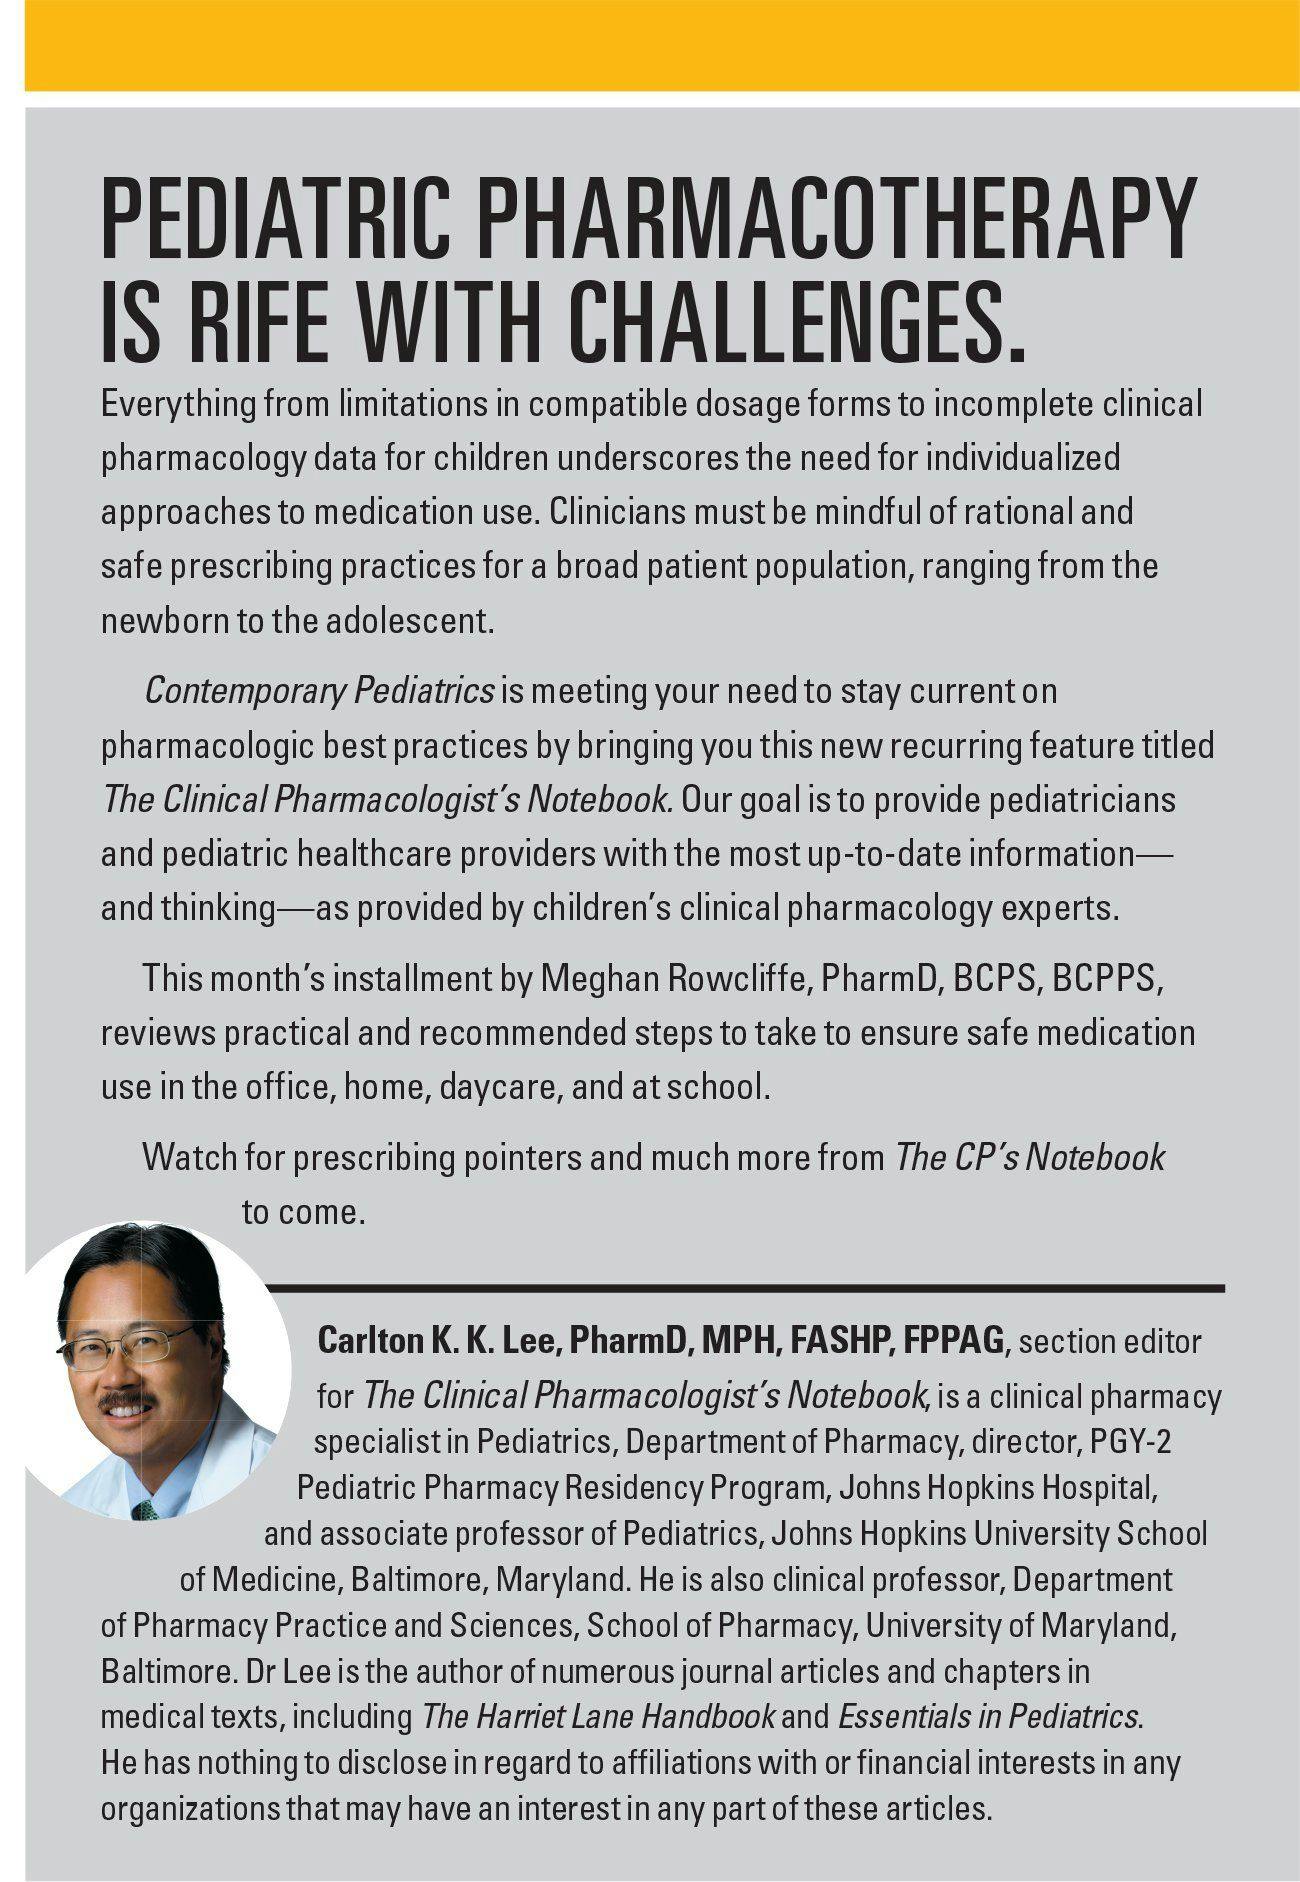 Pediatric pharmacotherapy is rife with challenges